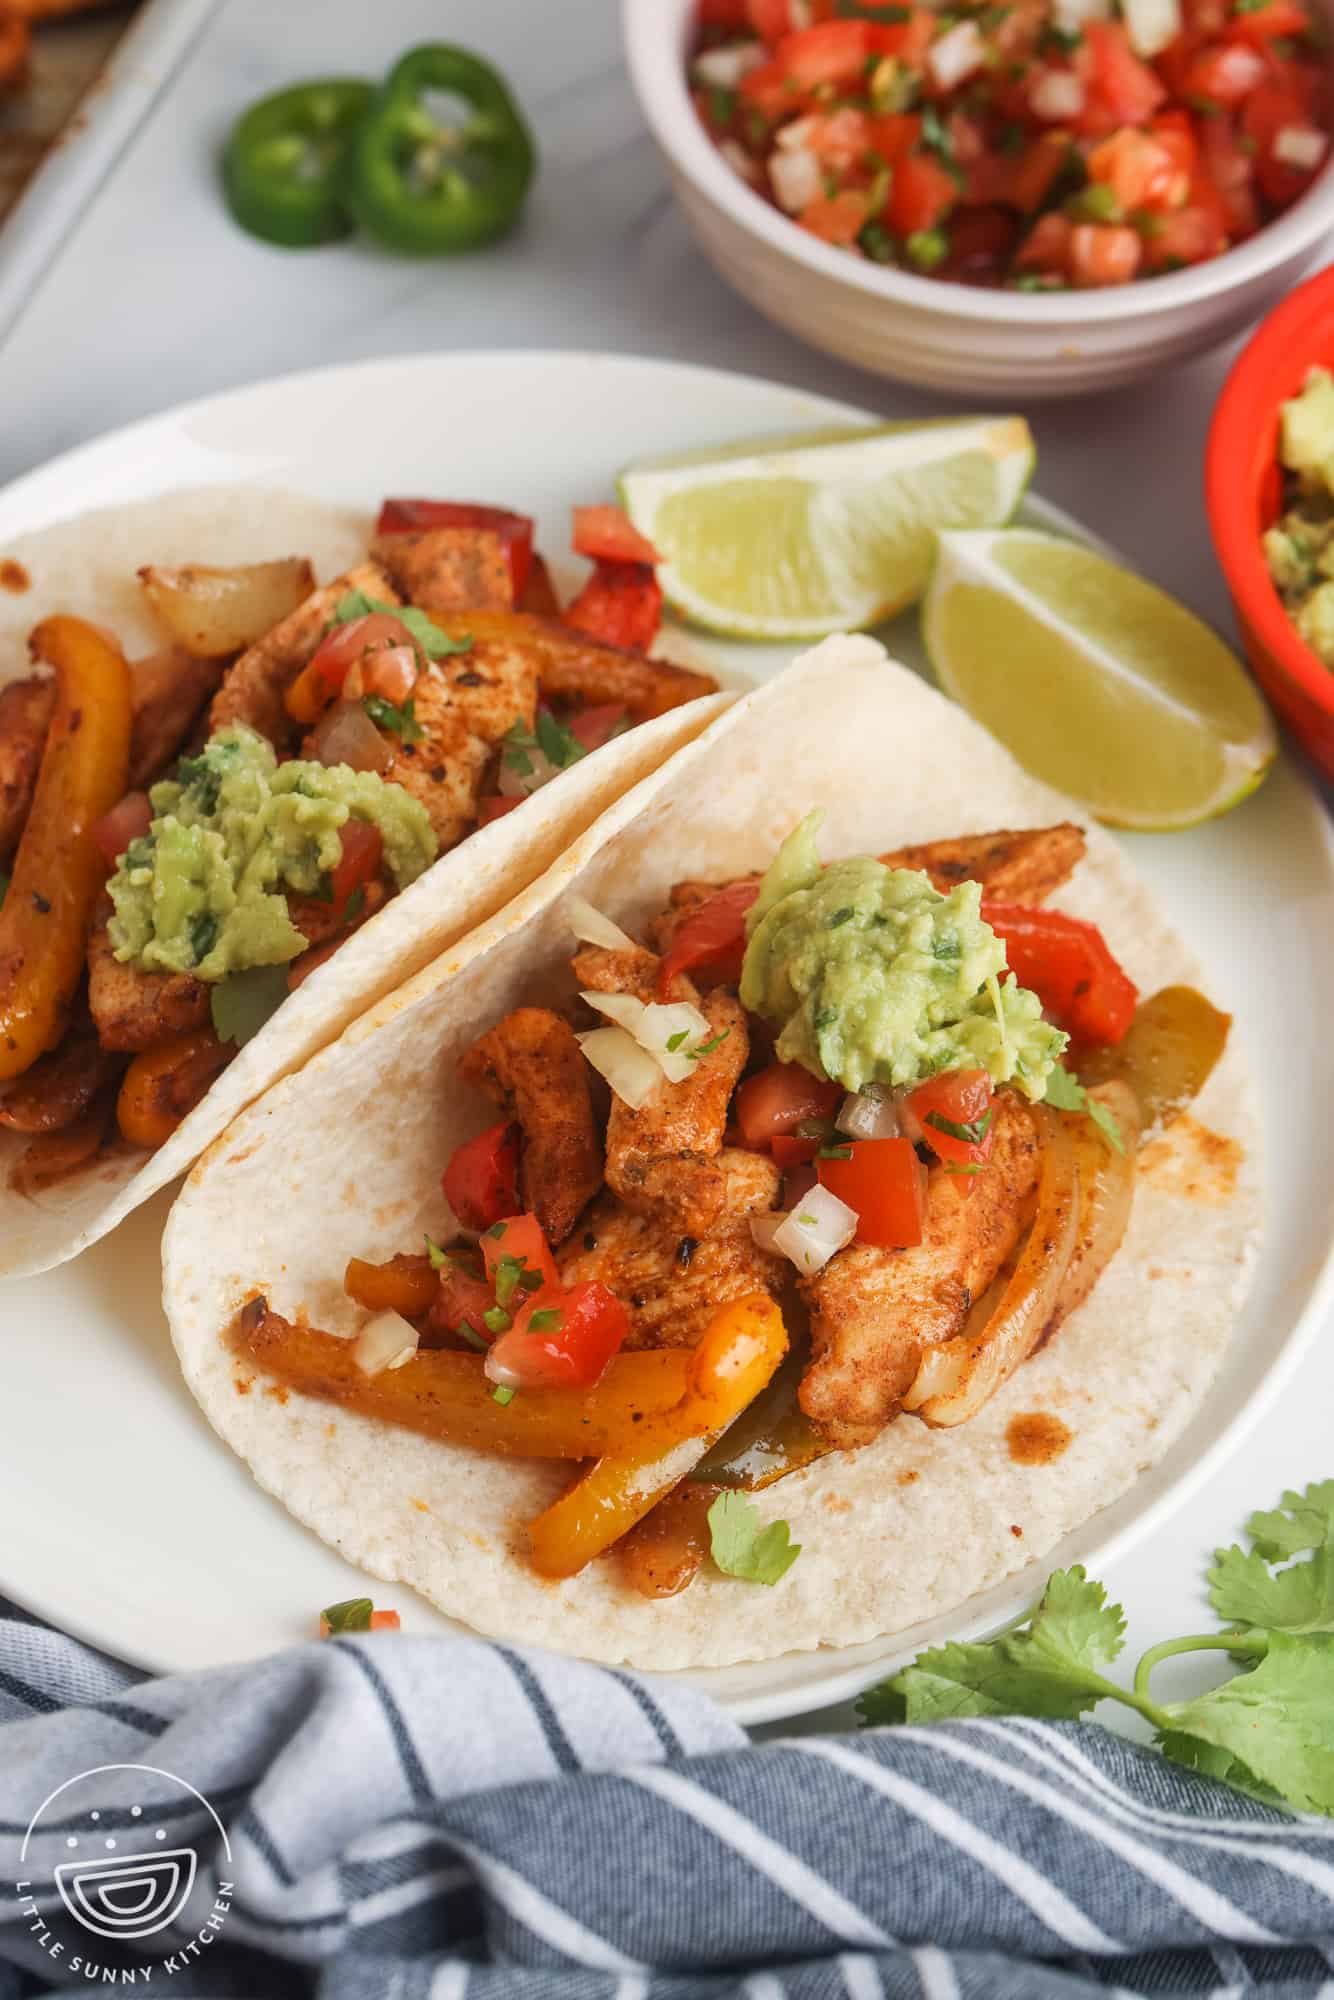 two chicken fajitas on flour tortillas on a plate, topped with pico and guac